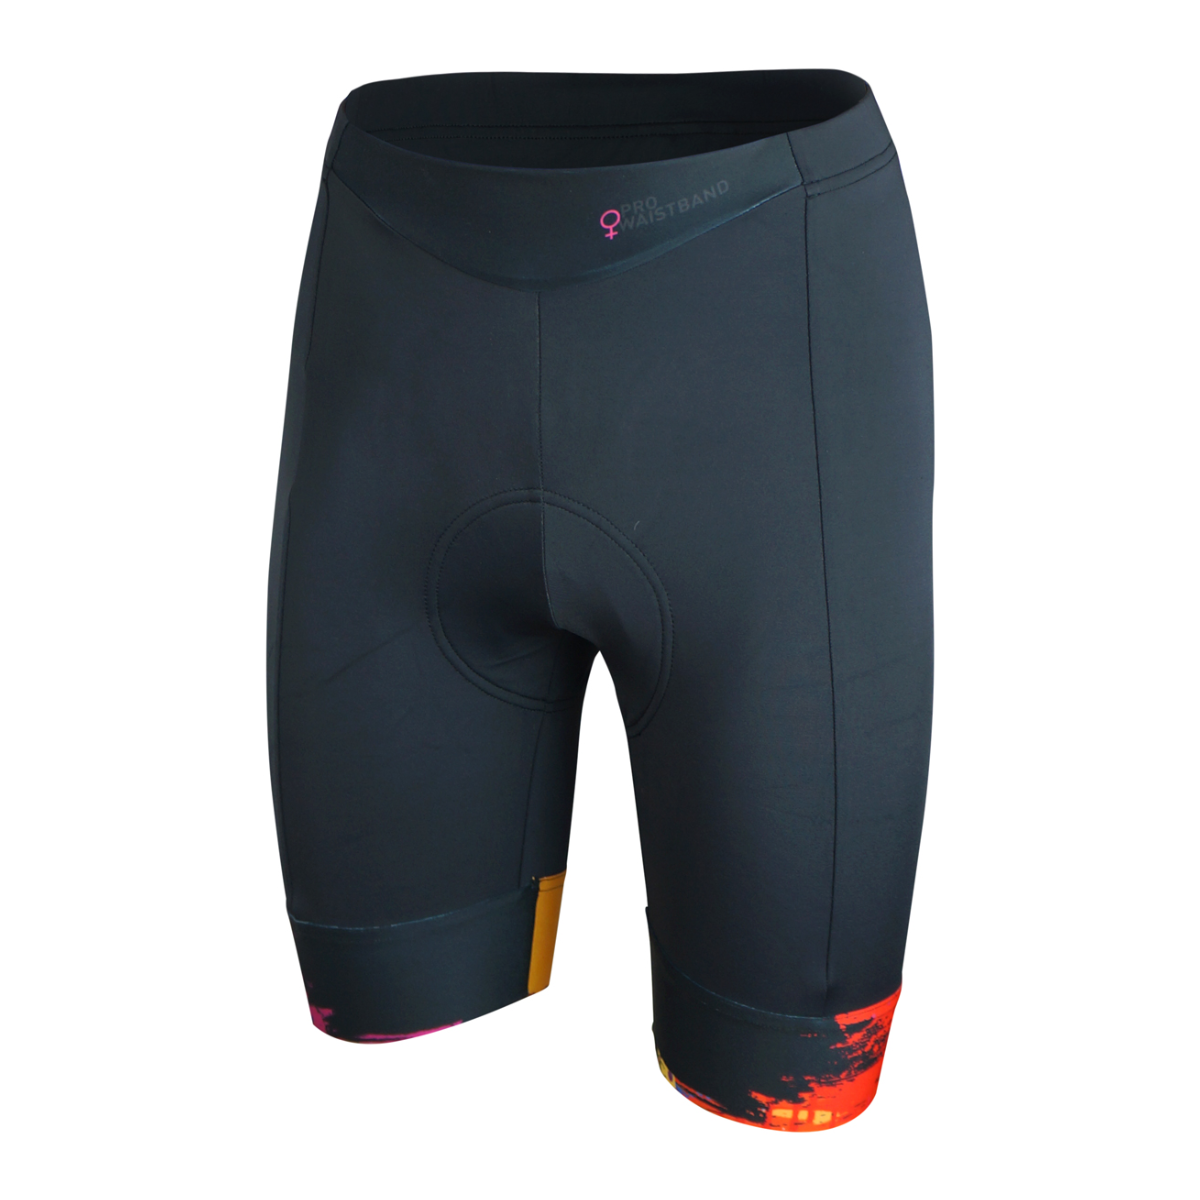 Women's cycling short with premium chamois and scotty browns design let gripper made by Tineli